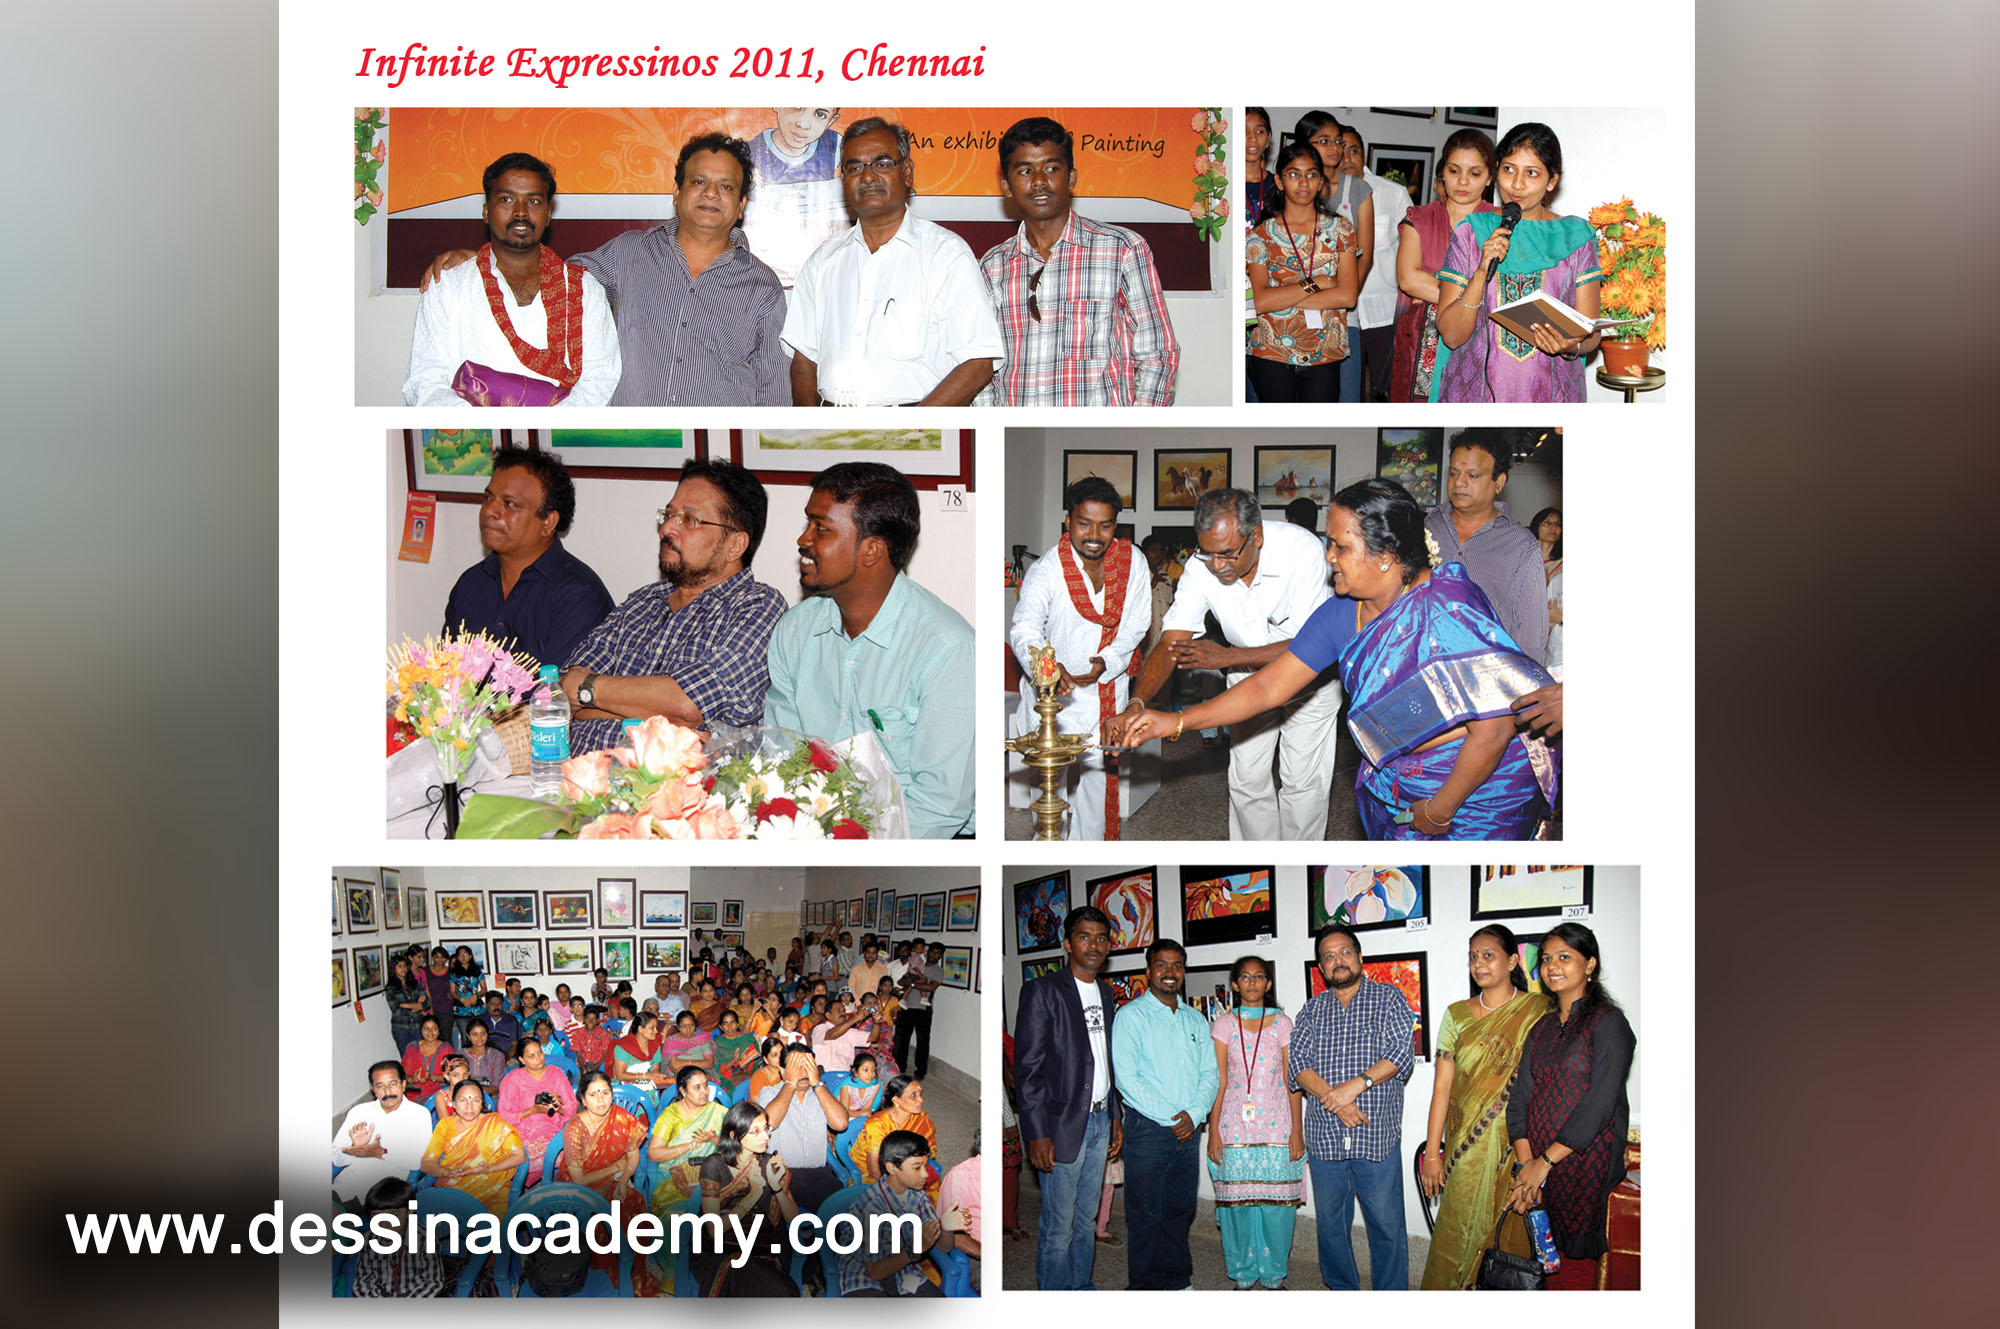 Dessin School of arts Event Gallery 5, canvas painting classes for adults in AdhanurDessin Academy